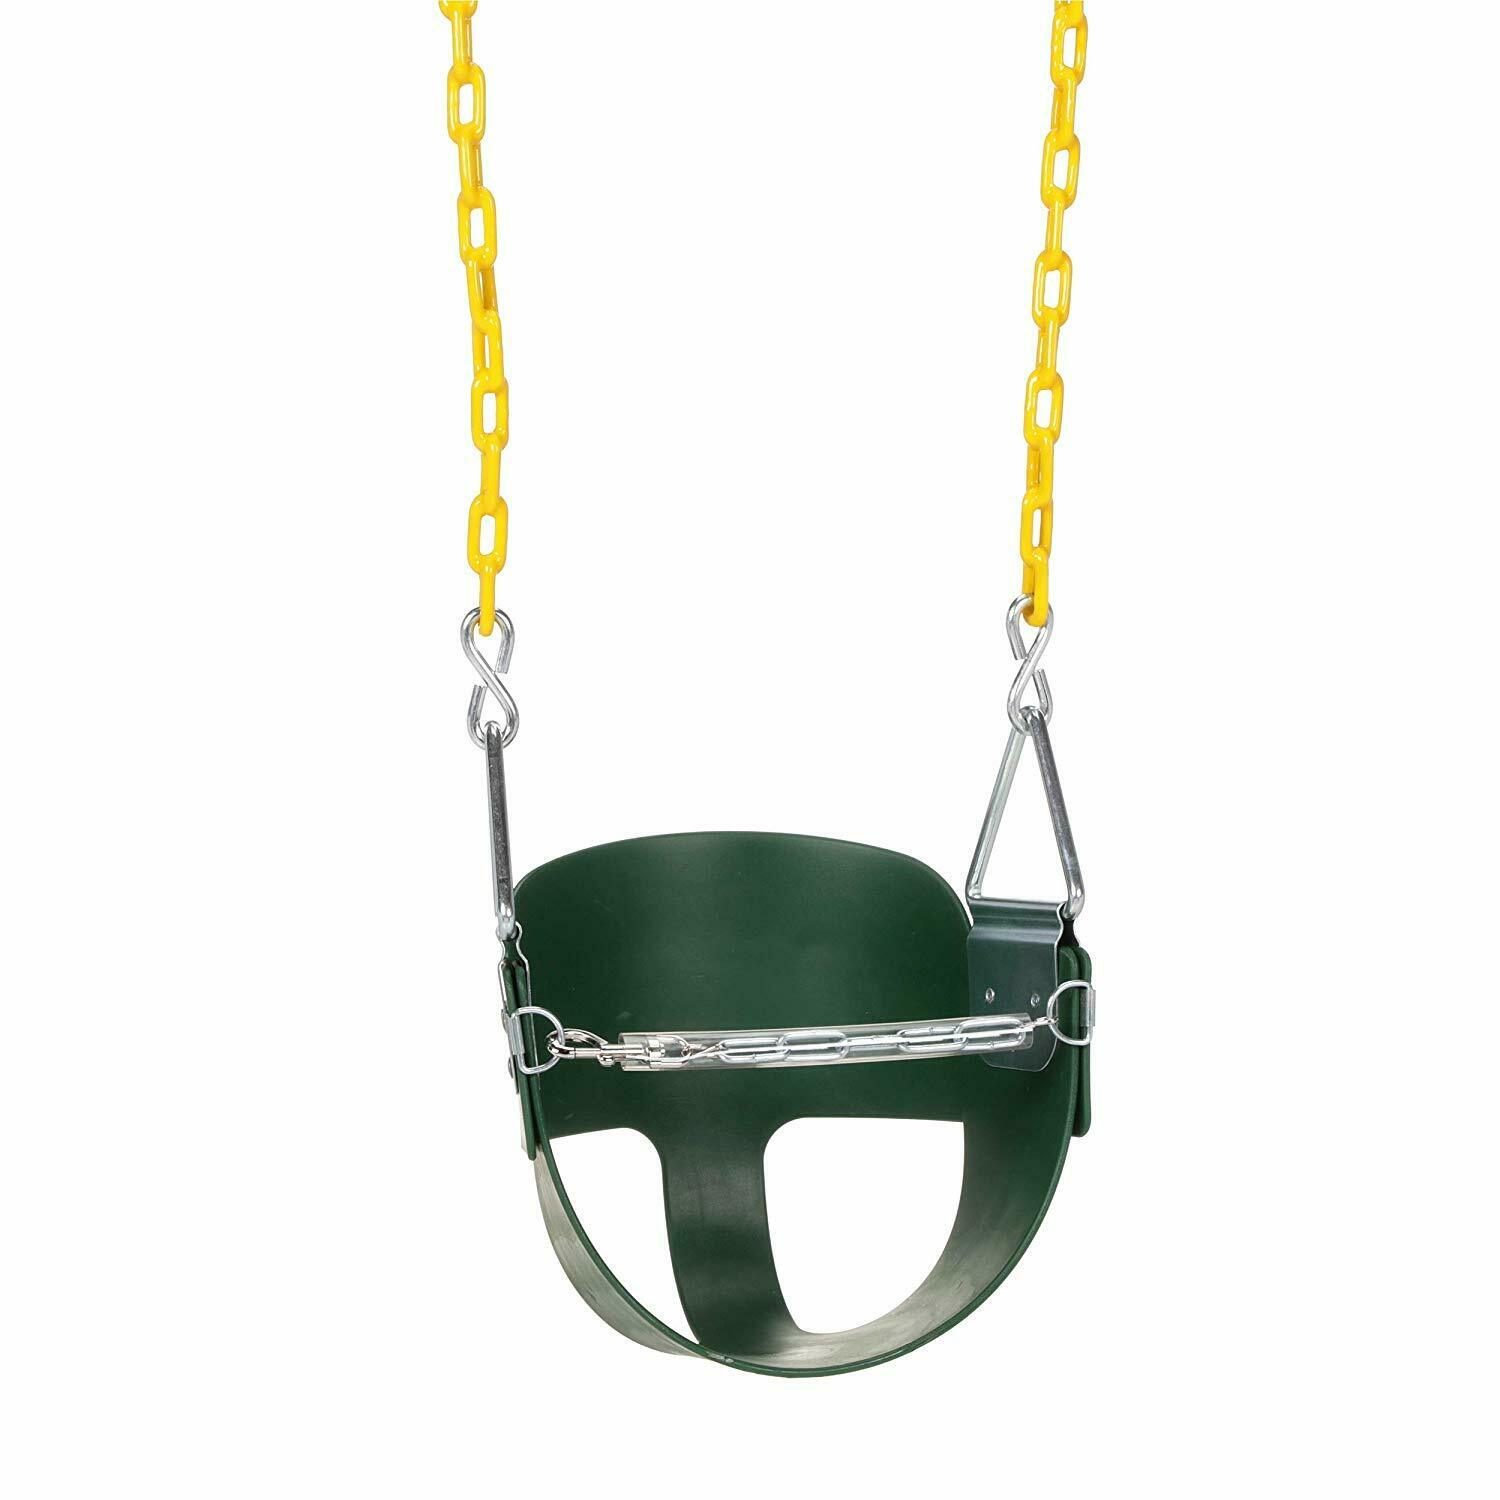 High-back Half Bucket Toddler Swing - Coated Swing Chains, Fully Assembled